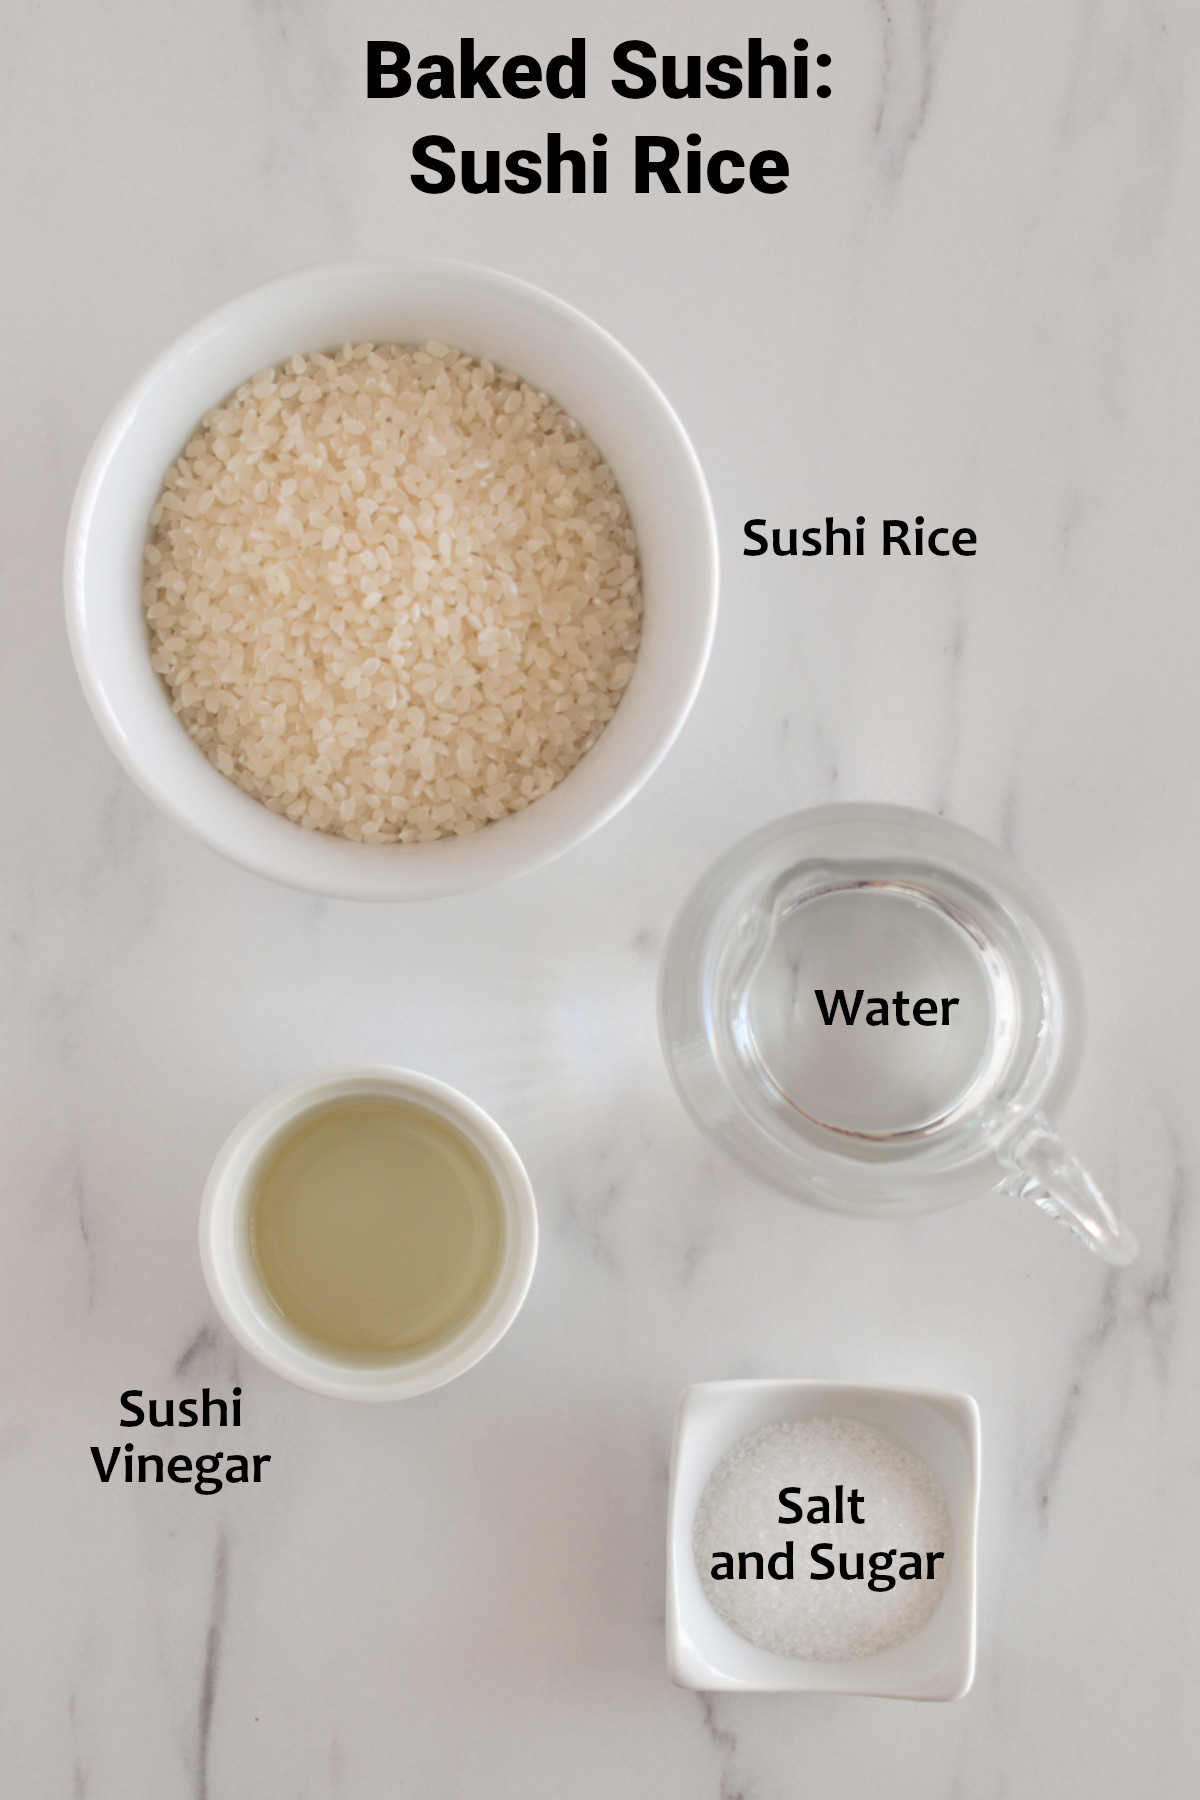 Ingredients used for sushi rice.